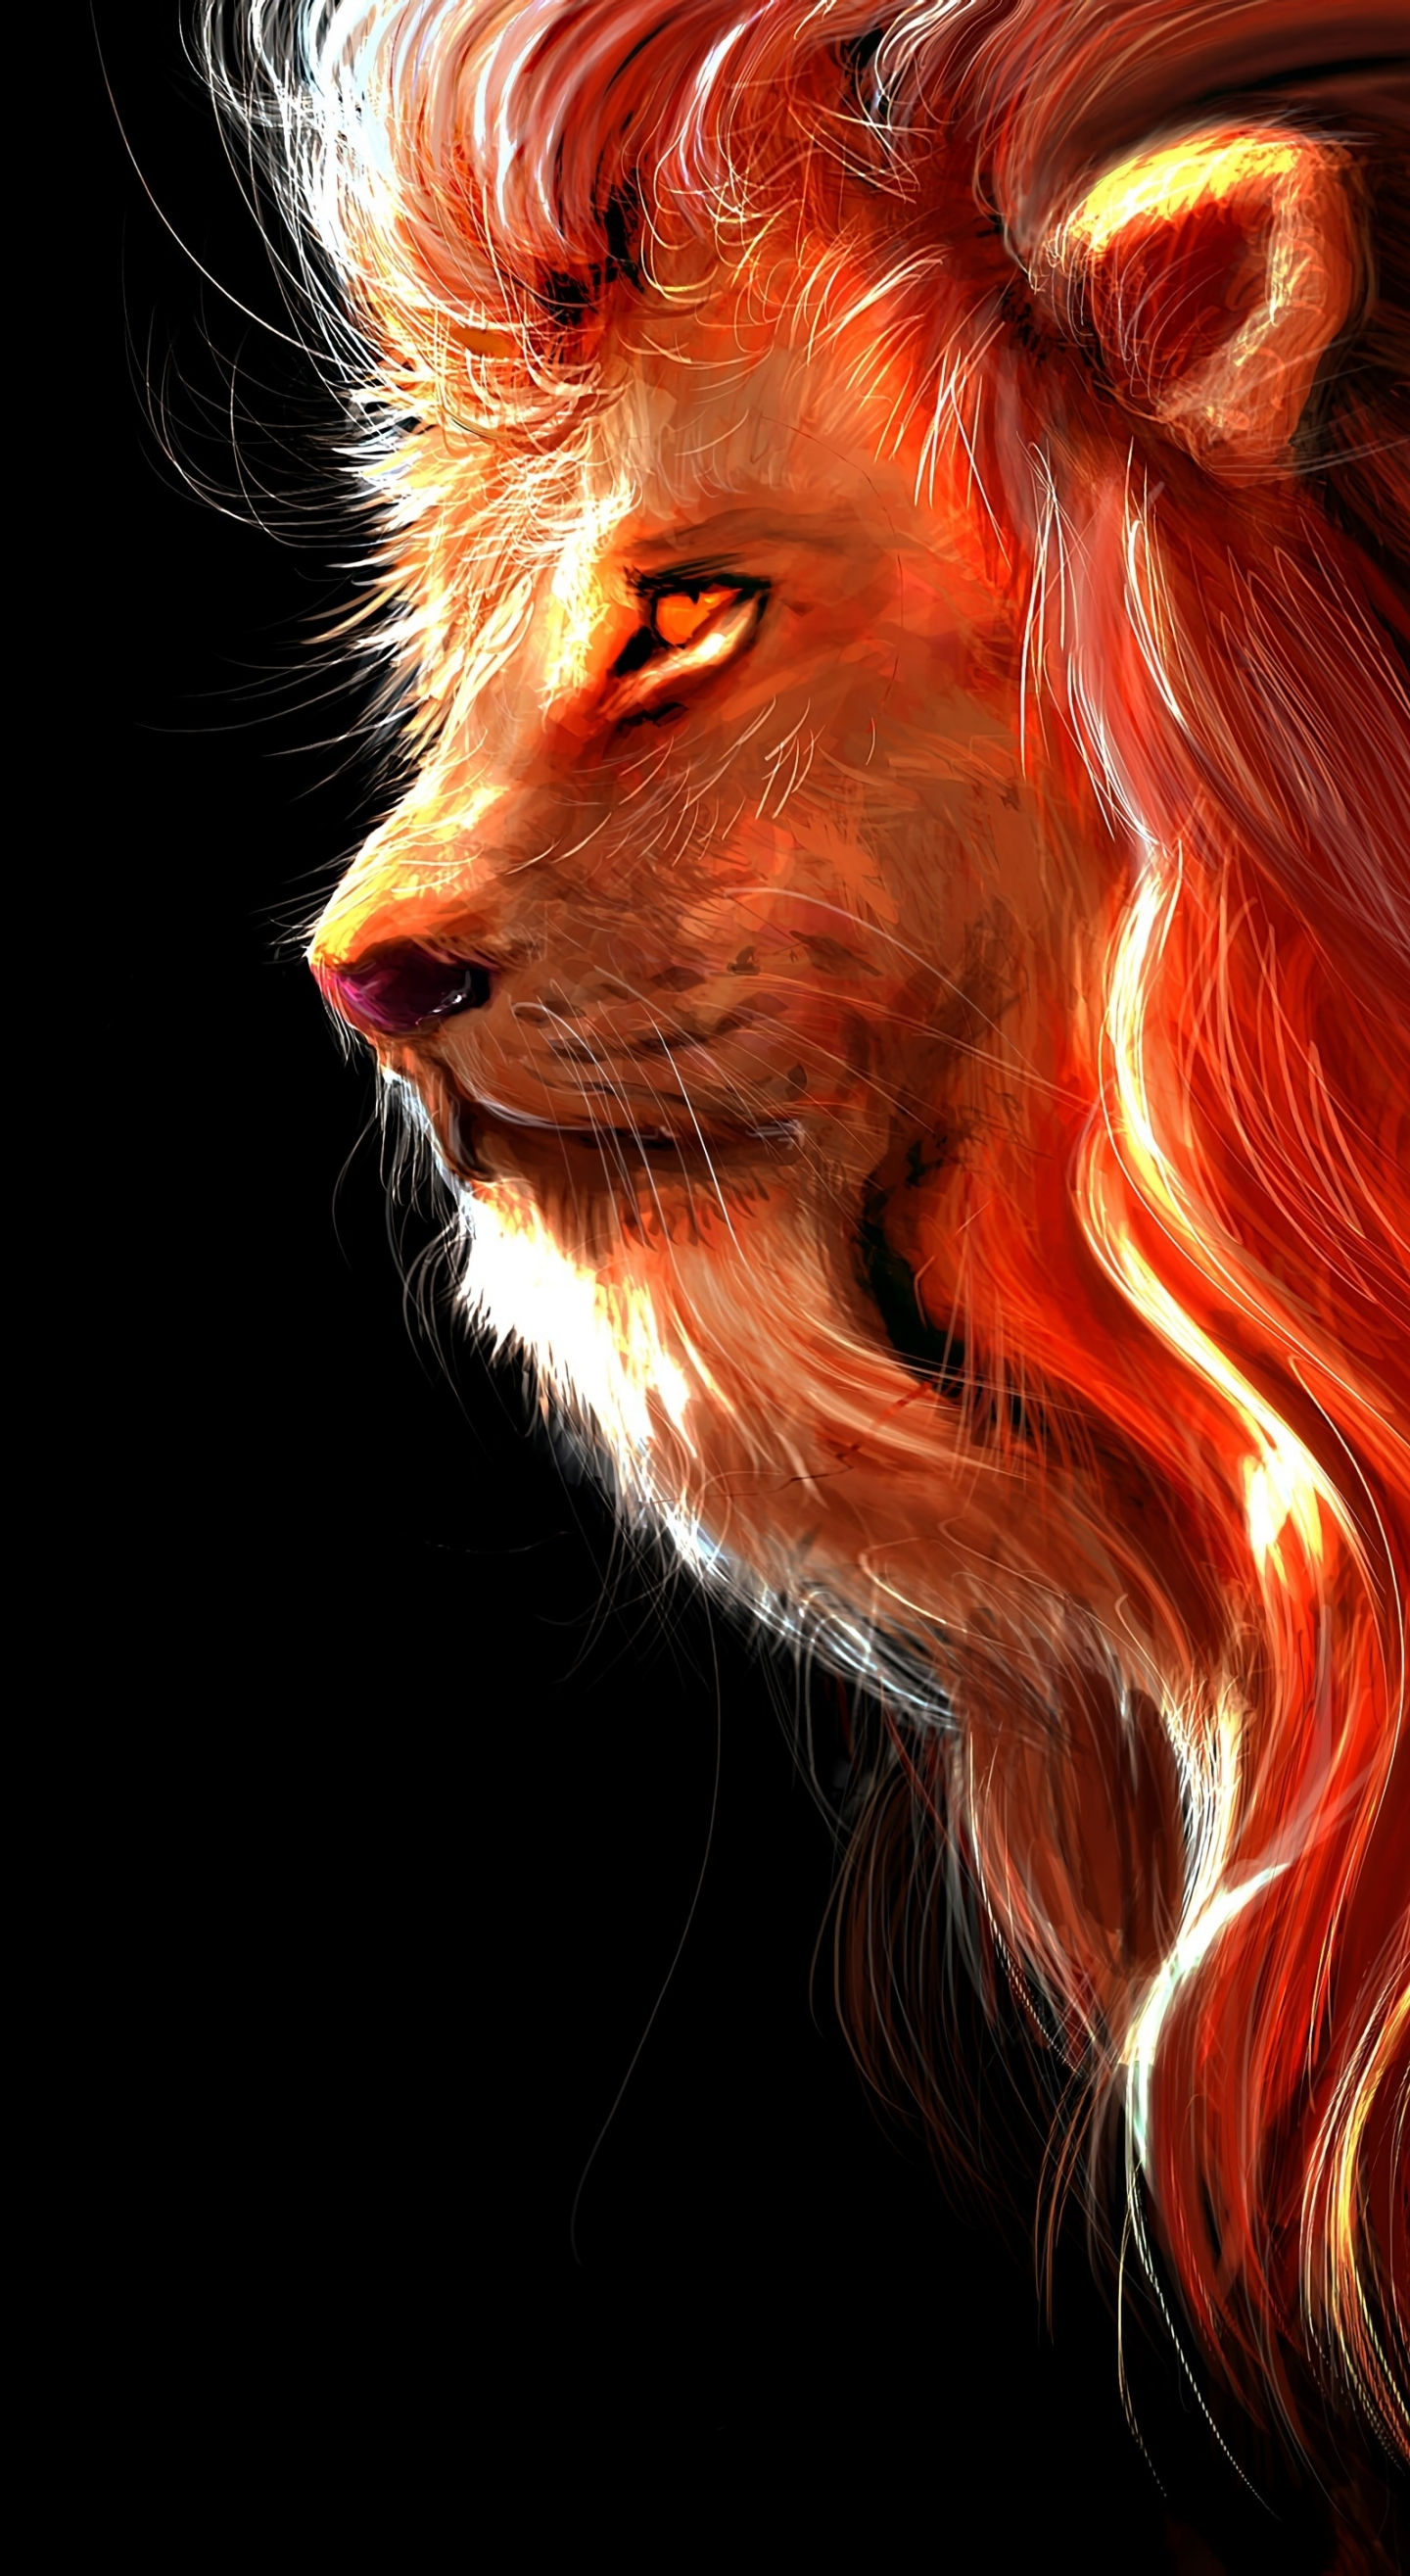 Lion Galaxy Wallpaper HD Images Roaring Treepy Cool Lion Galaxy Pictures   FancyOdds